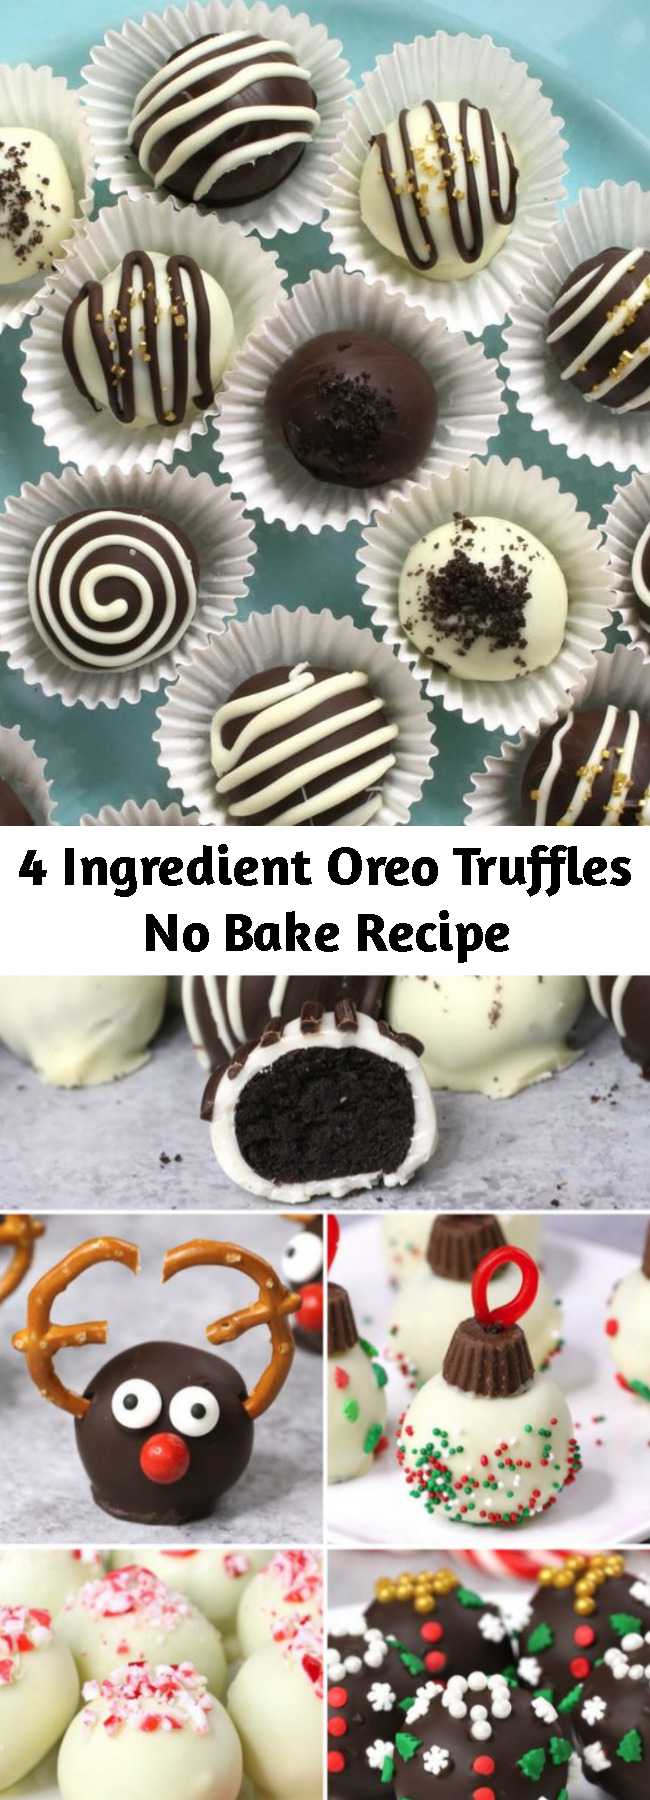 4 Ingredient Oreo Truffles No Bake Recipe - These Oreo Truffles are mouthwatering bite-size treat everyone will love! These homemade oreo balls are coated in chocolate and decorated with sprinkles and drizzle for a stunning presentation. Perfect for a party and also as fun DIY gifts.